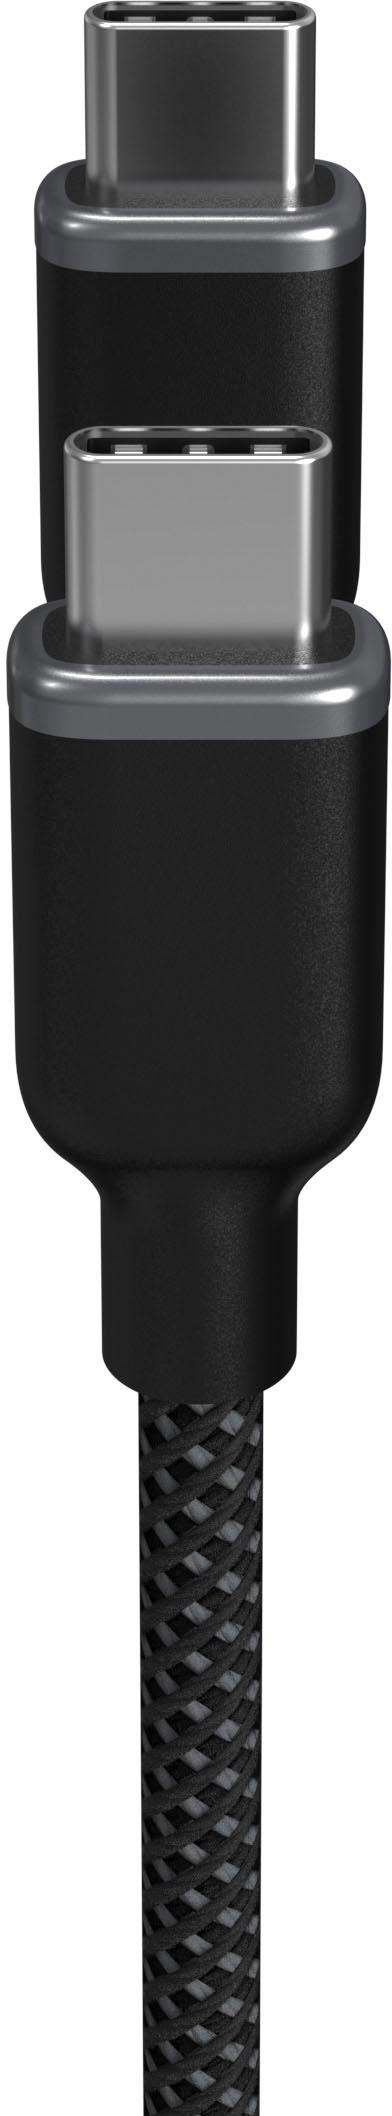 mophie charge stream 3m USB-C to USB-C Cable Black 409911483 - Best Buy